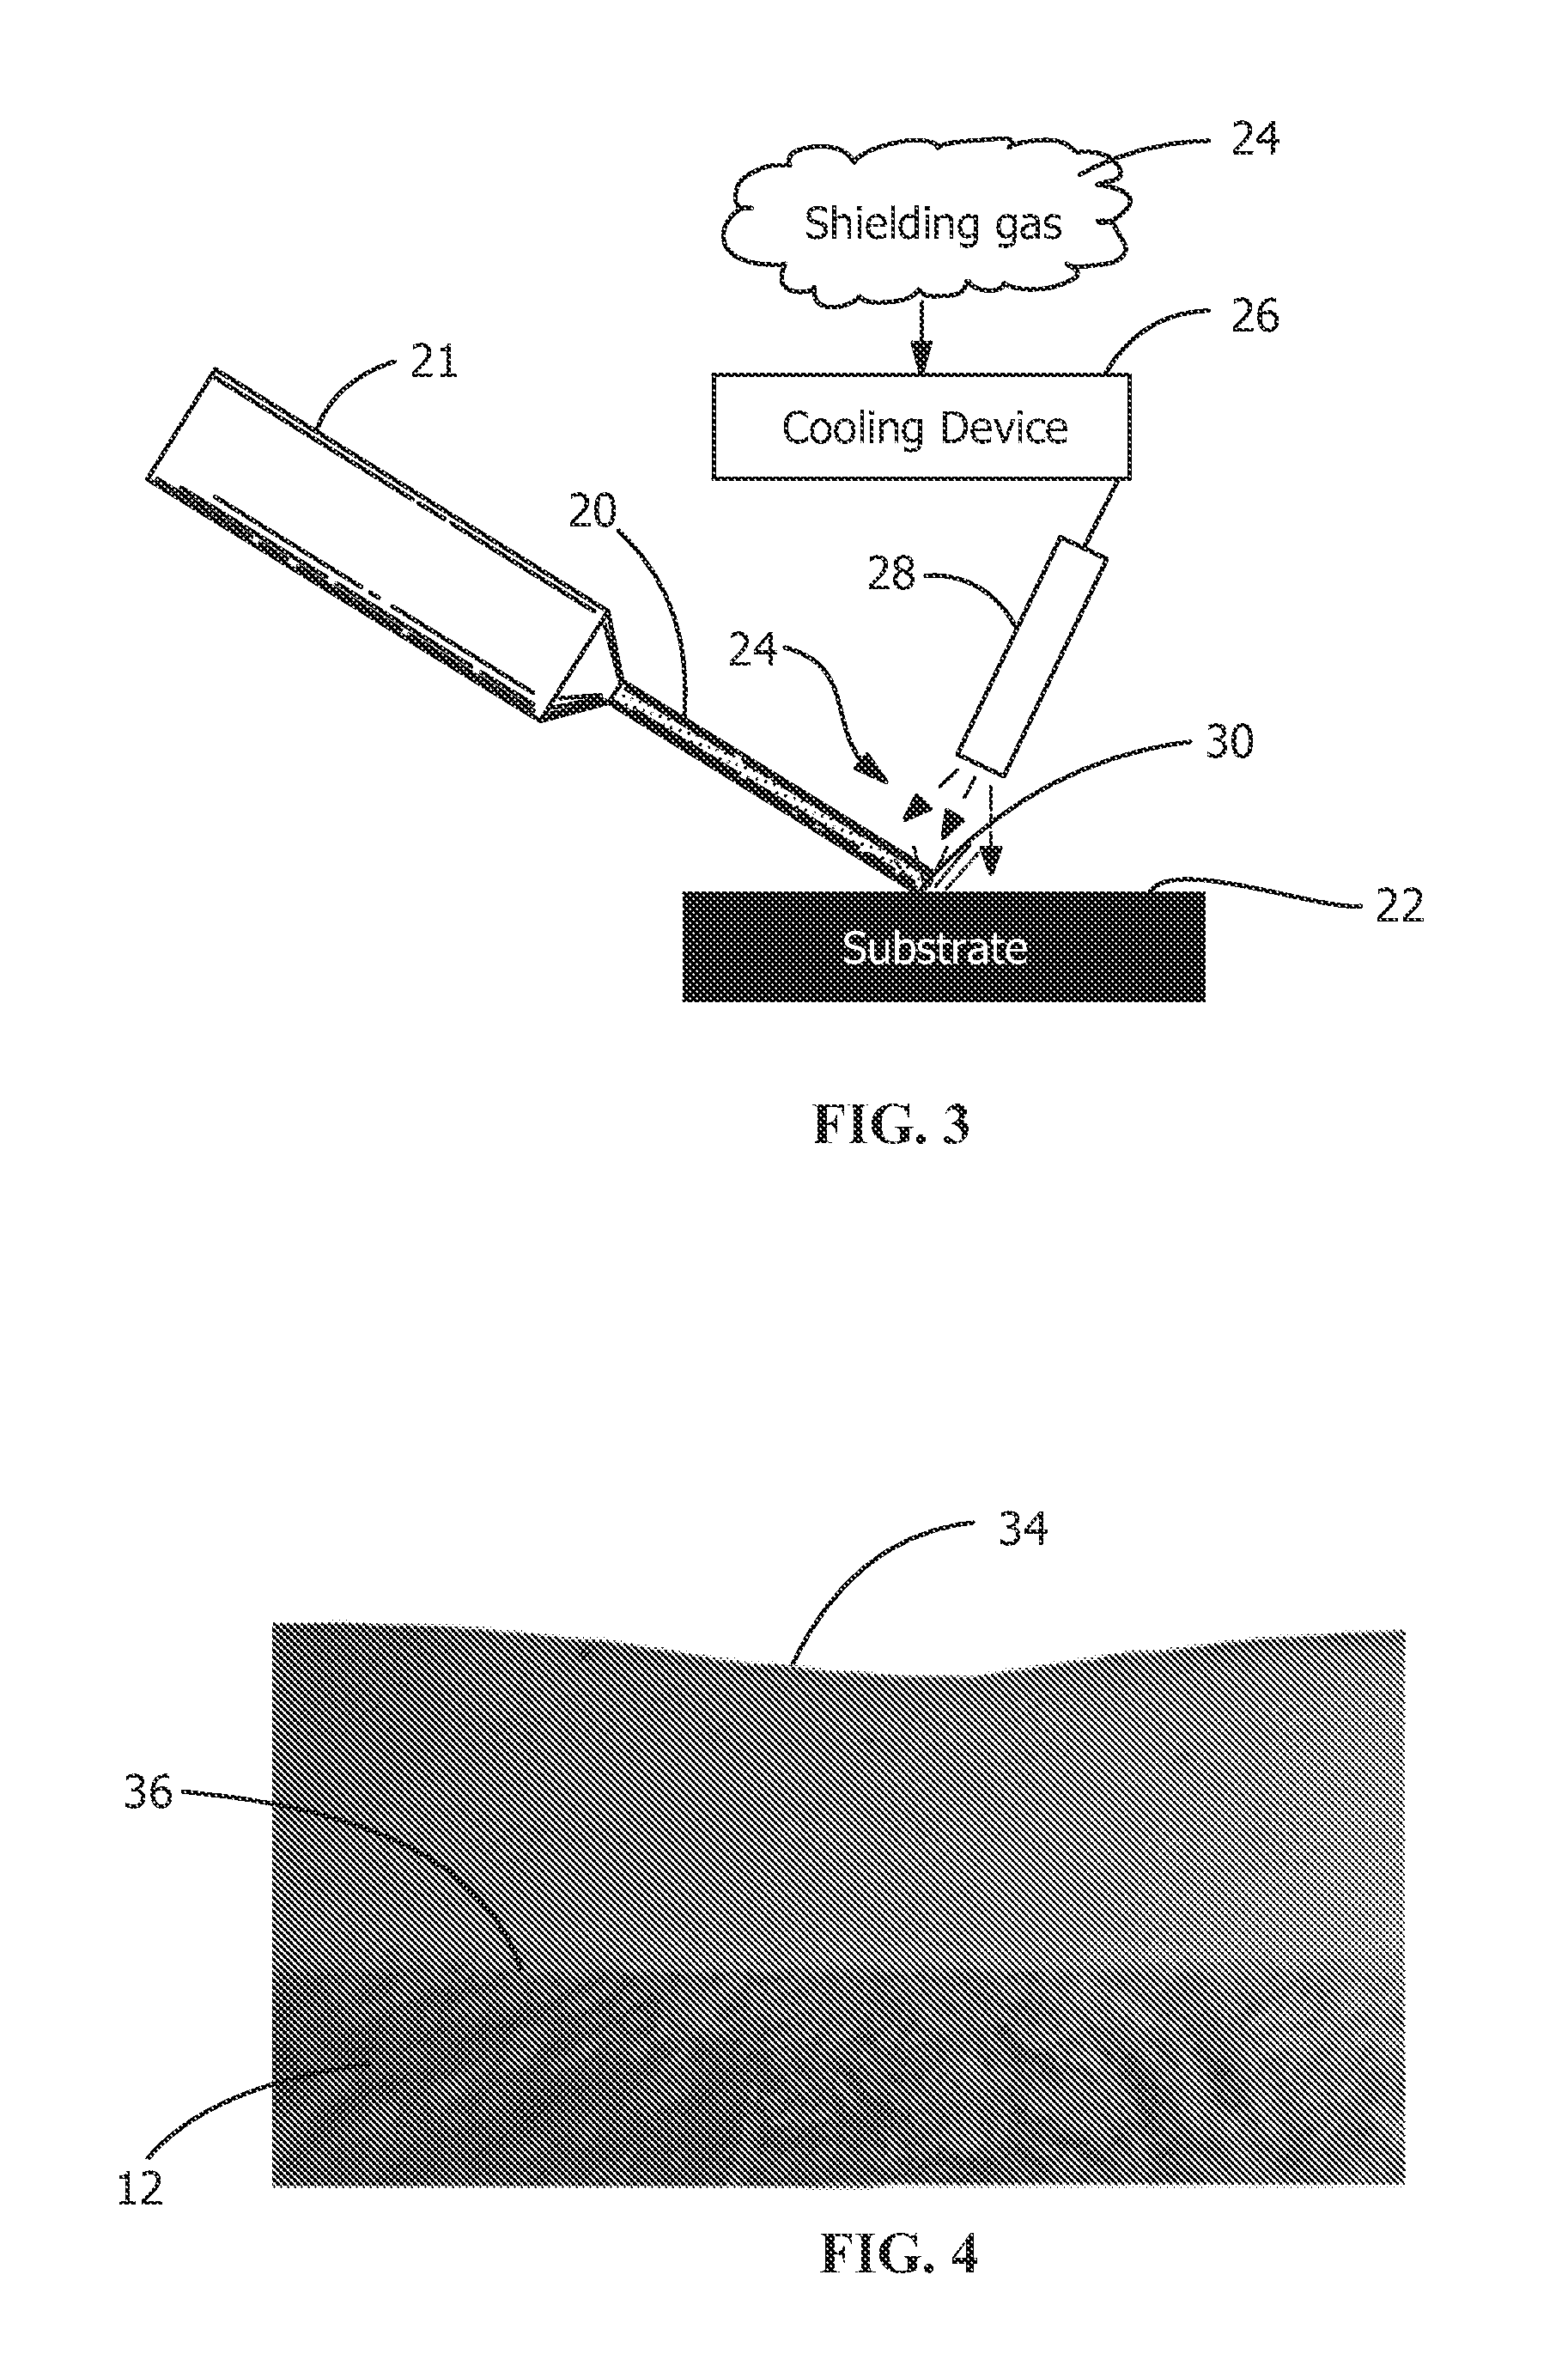 Electrospark deposition system for repair of gas turbine